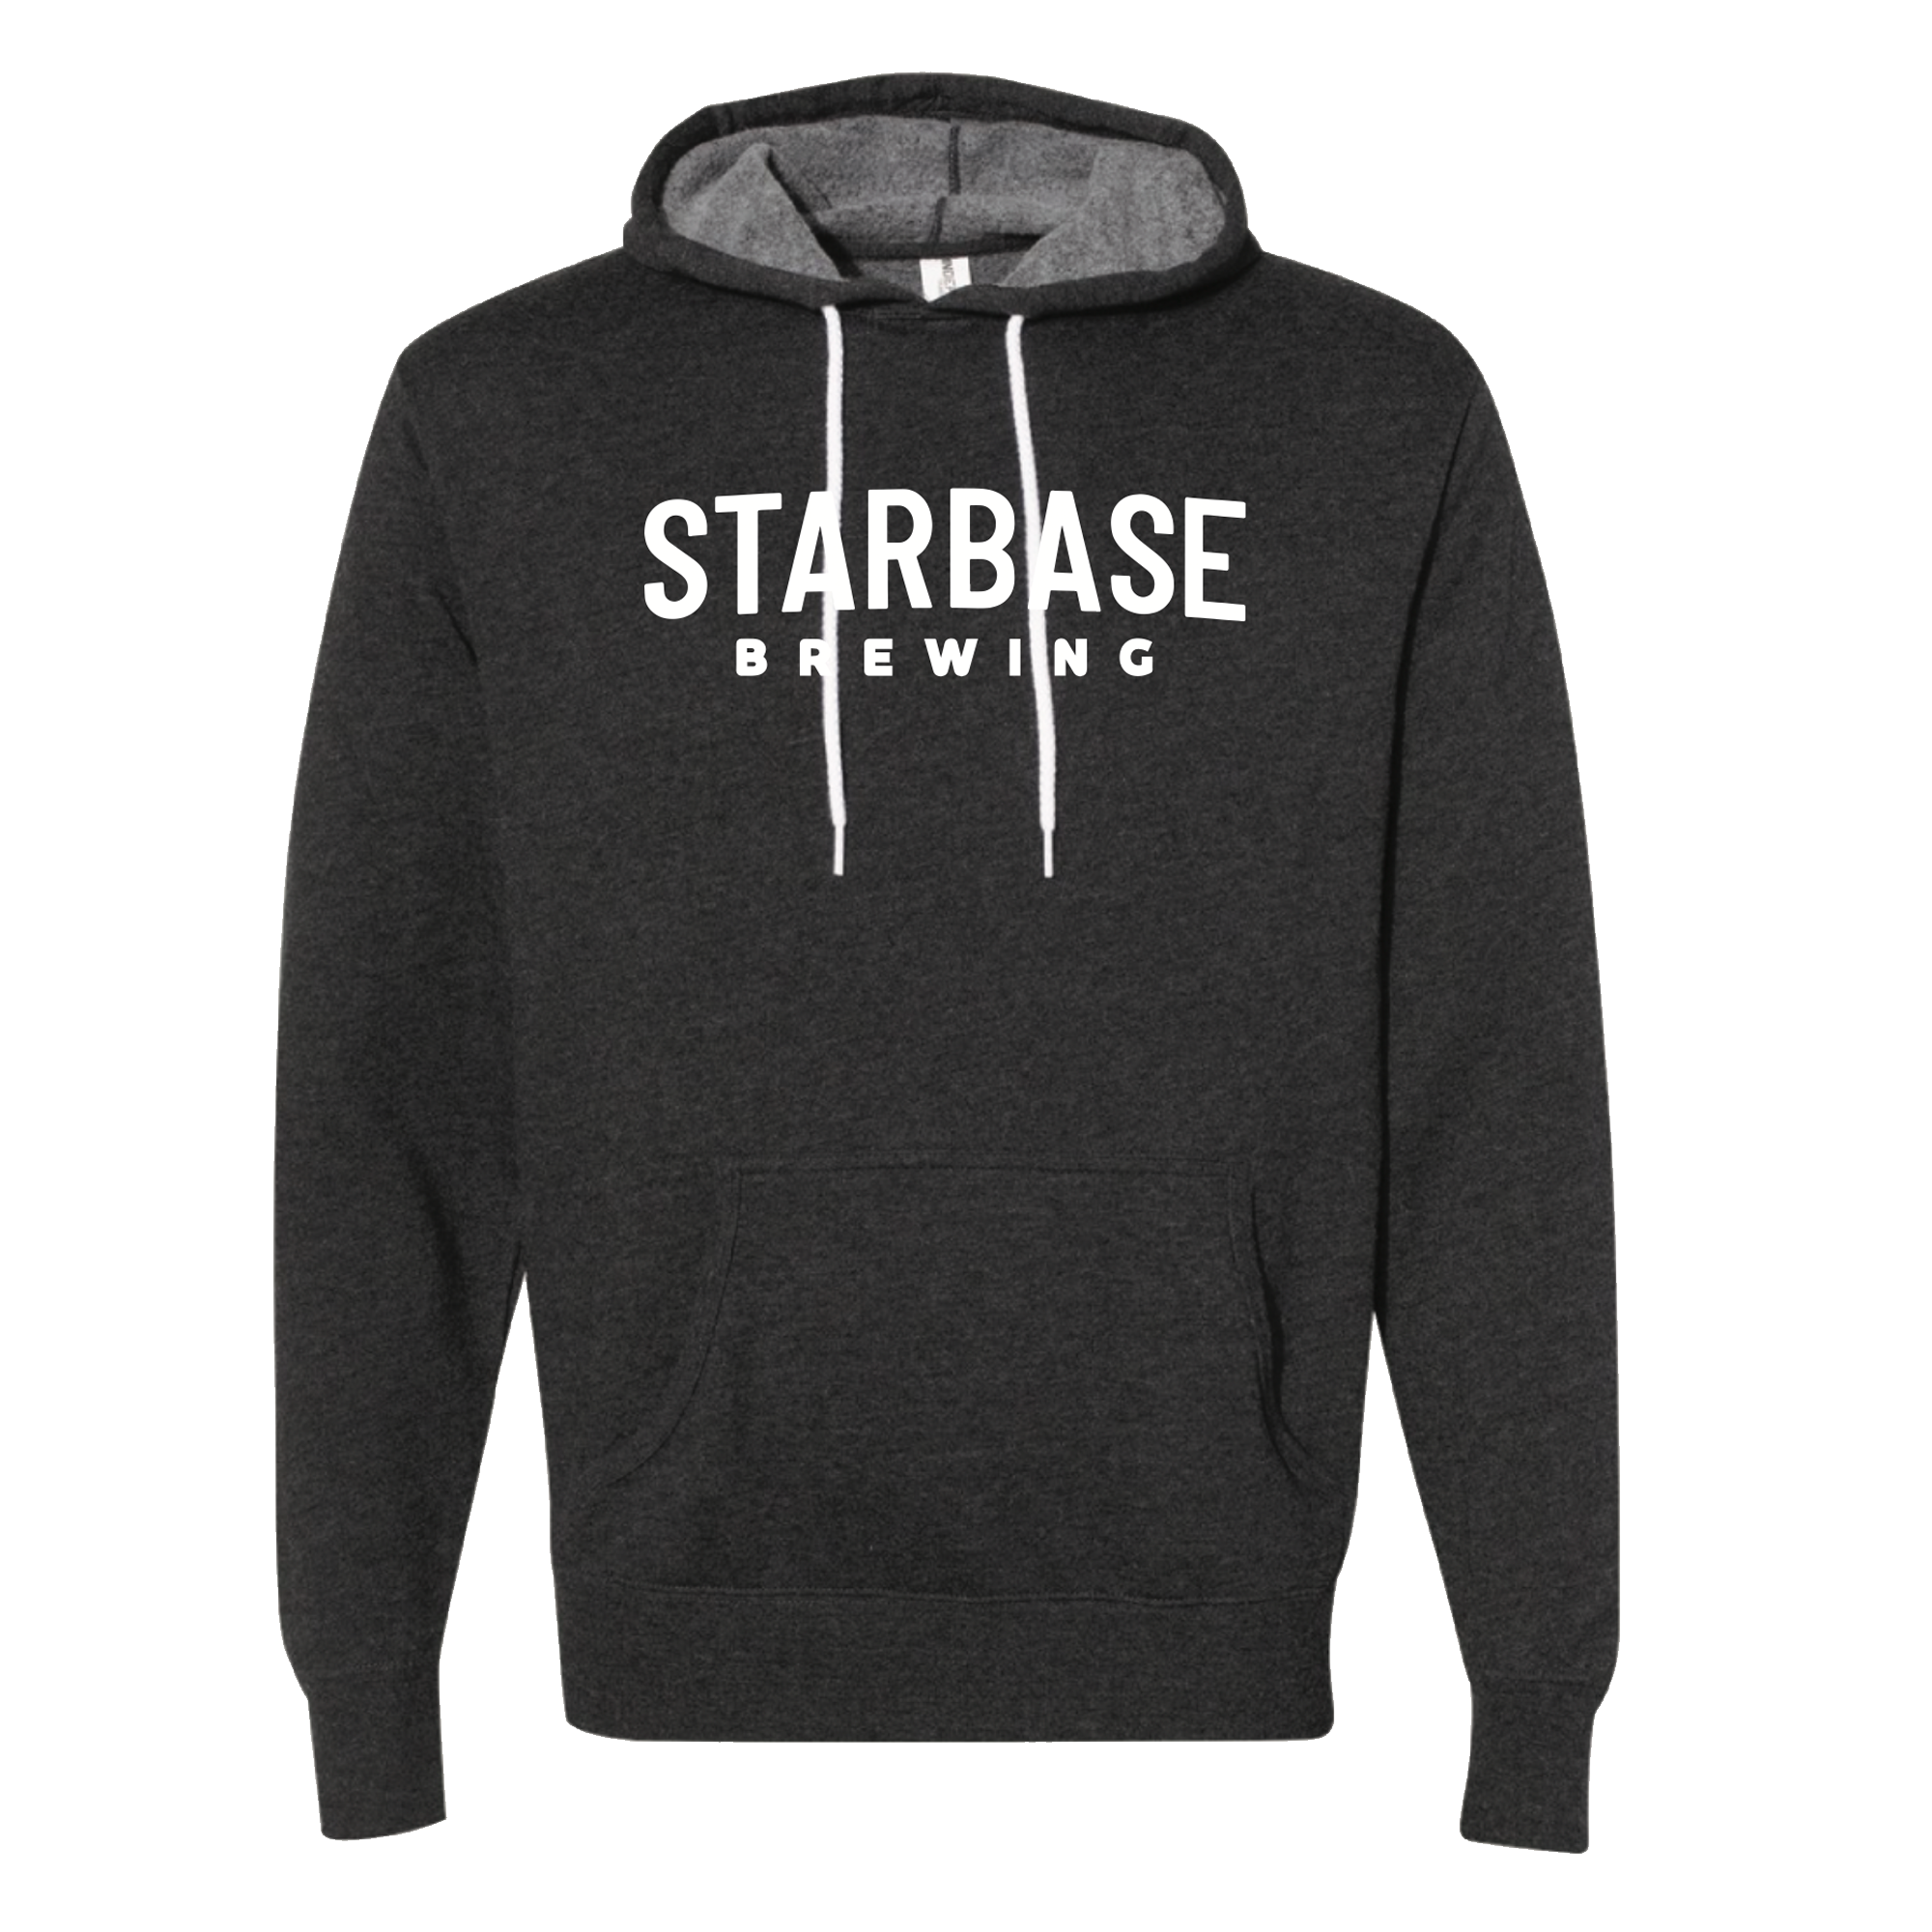 Dark Gray Pullover Hoodie with a White Starbase Brewing Logo